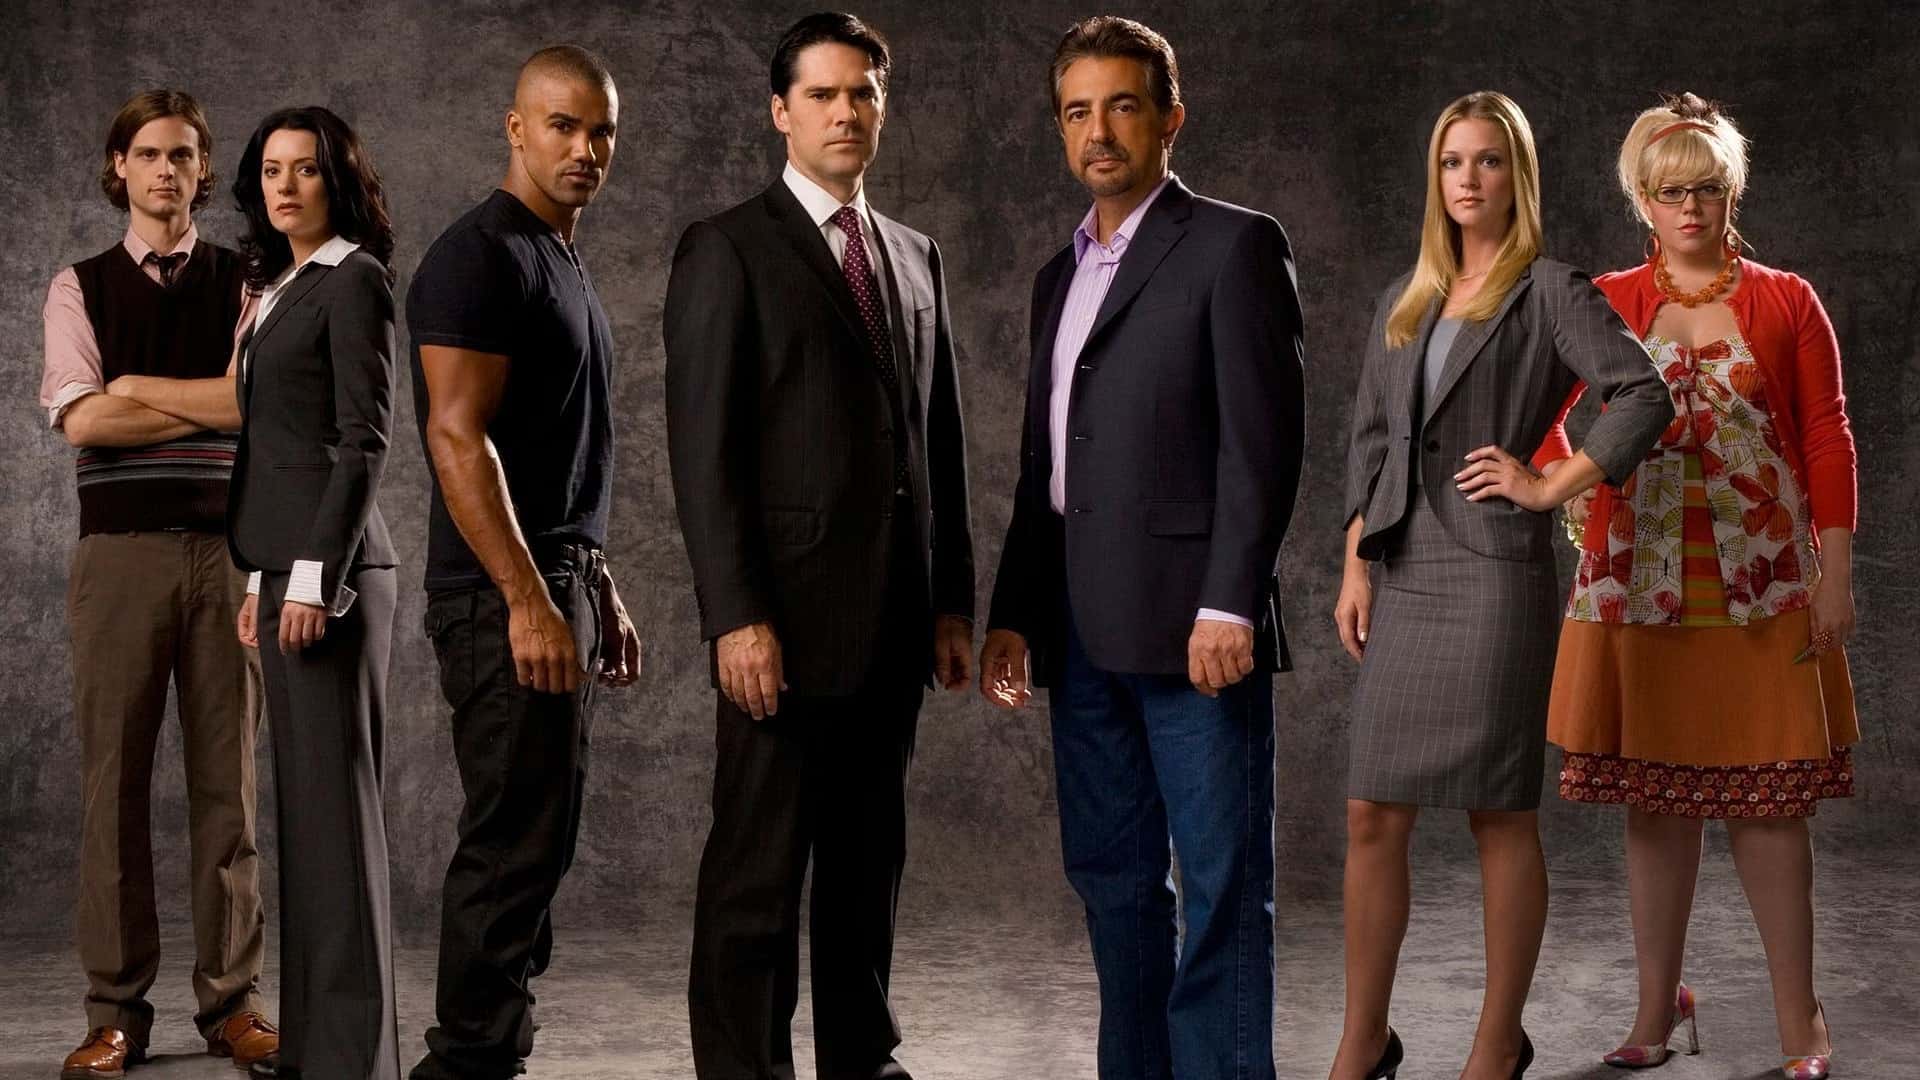 Why Did Elle Leave Criminal Minds? The Early Departure of The Character